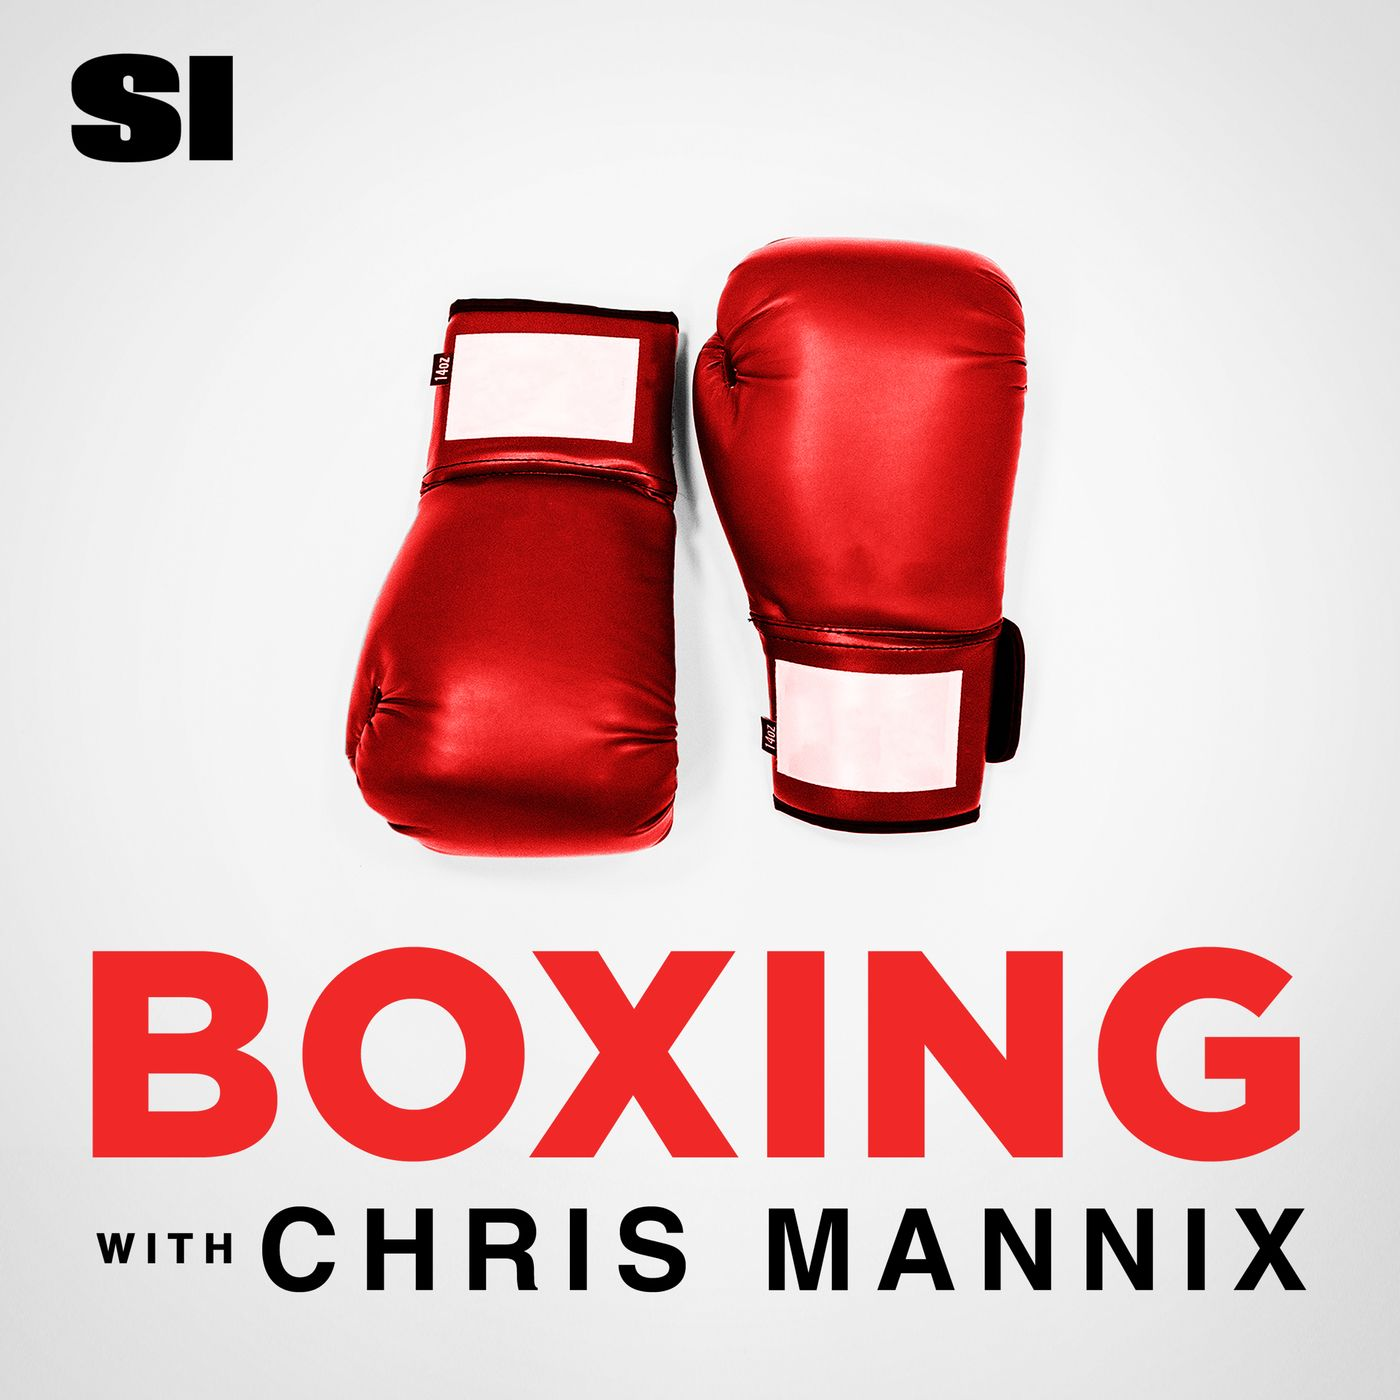 A highlight from Boxing with Chris Mannix - Chocolatito-Estrada III is here